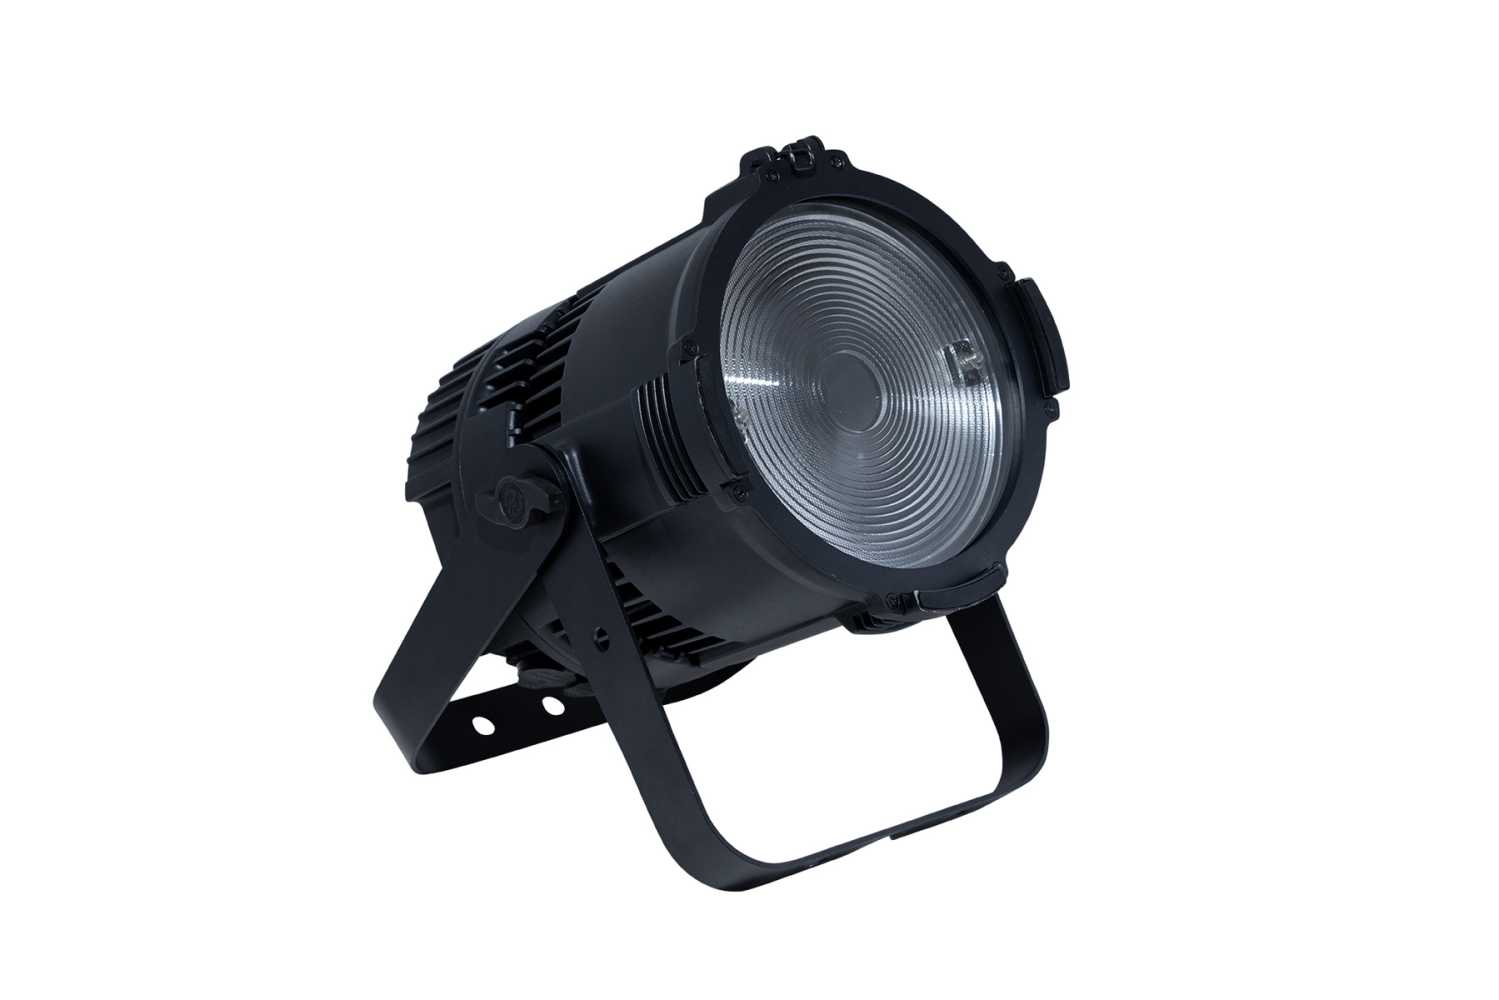 On display at GLP’s LDI stand will be the Fusion X-PAR 8Z and X-PAR 18Z